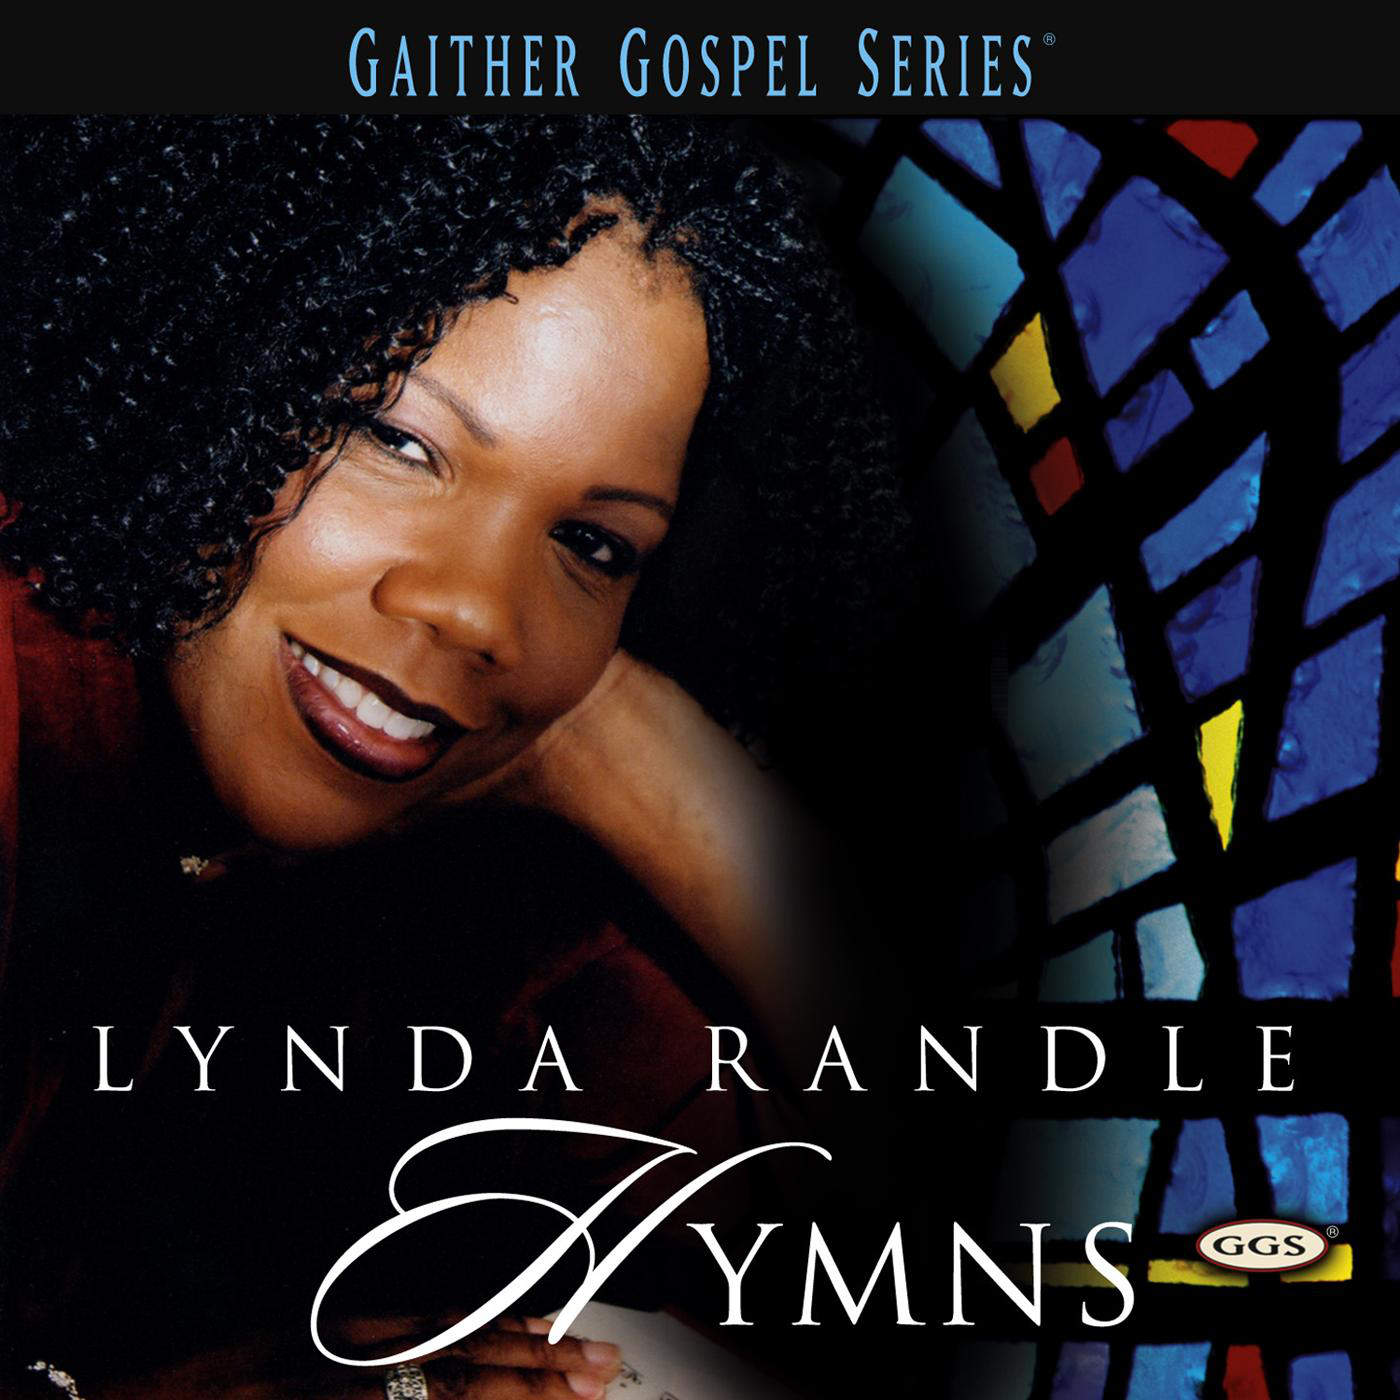 Art for Medley: Pass Me Not O Gentle Savior / I Need Thee Every Hour by Lynda Randle